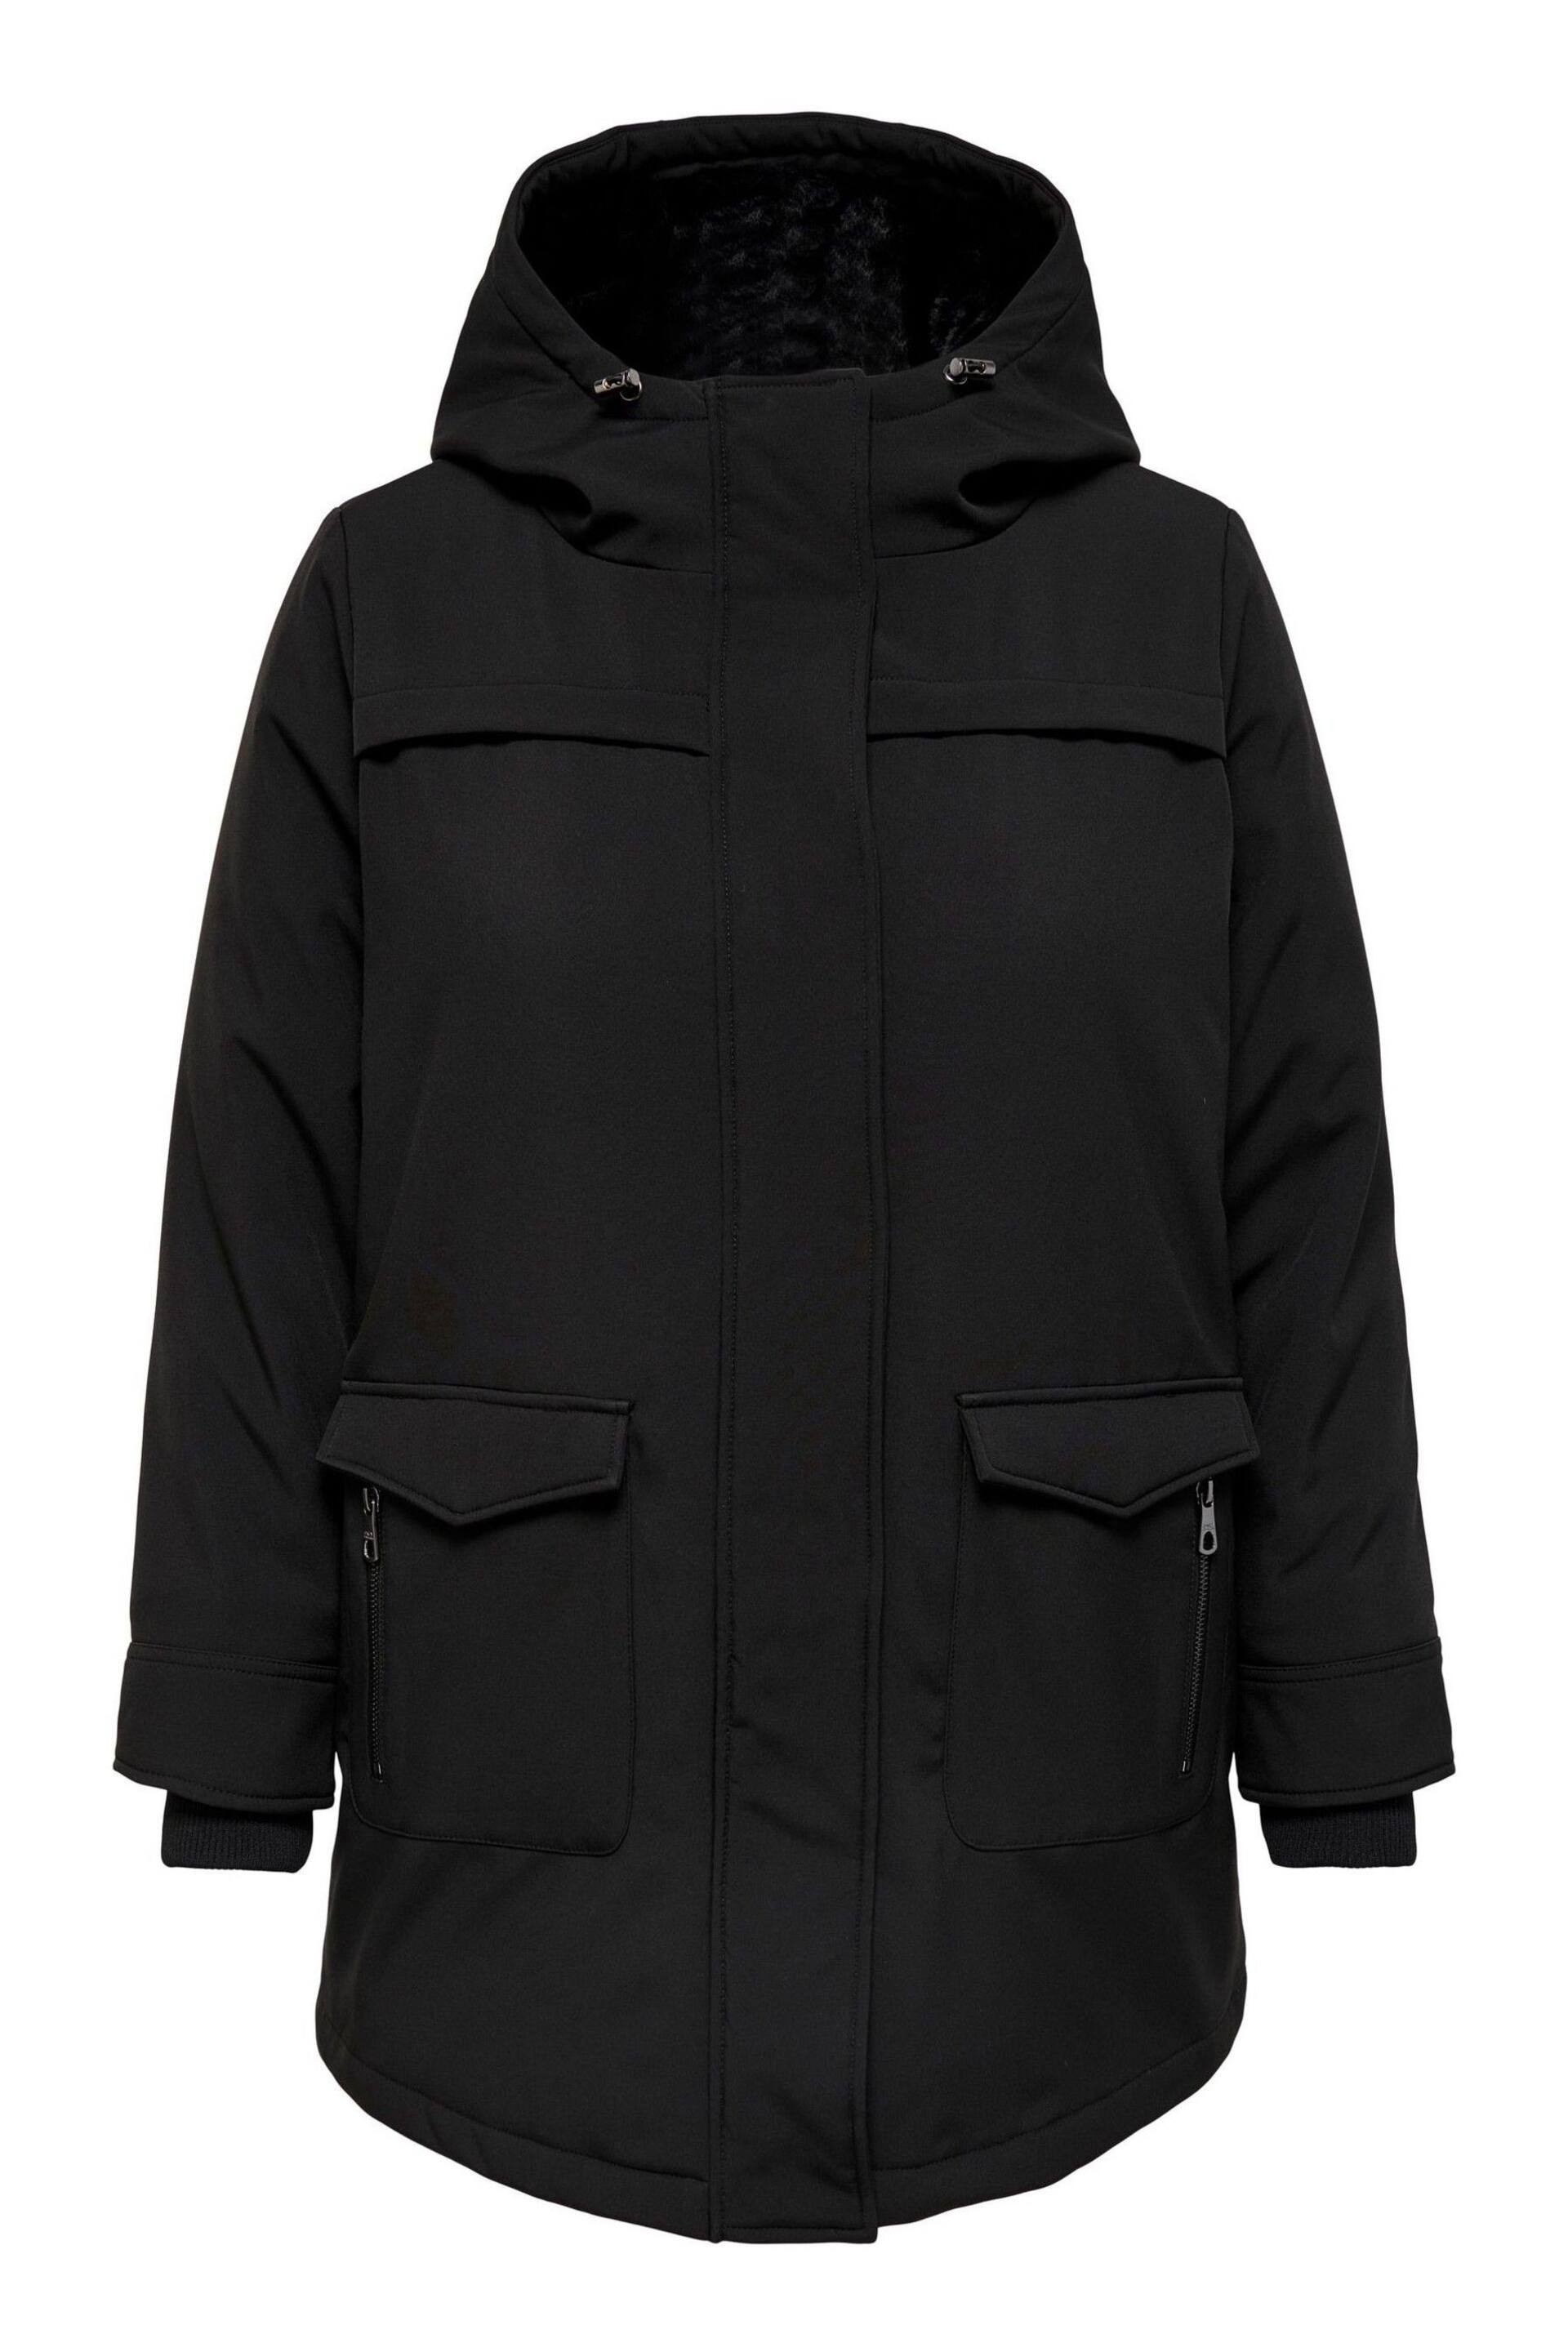 ONLY Curve Black Technical Parka Coat With Faux Fur Lining - Image 6 of 6